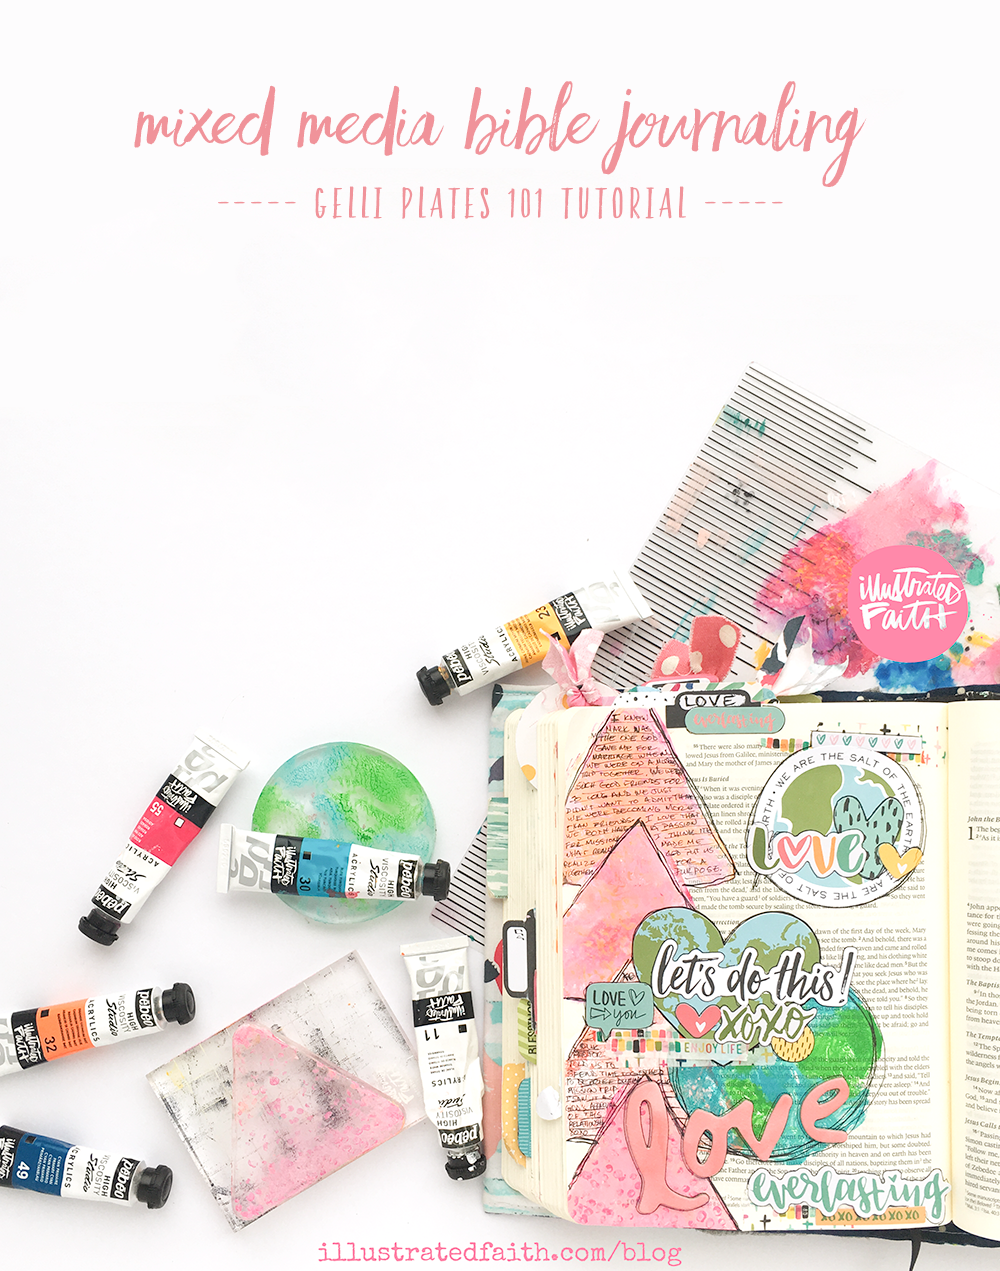 mixed media gelli plate tutorial and Bible Journaling entry by Heather Greenwood | Illustrated Faith Stubborn Love | The Great Commission and love